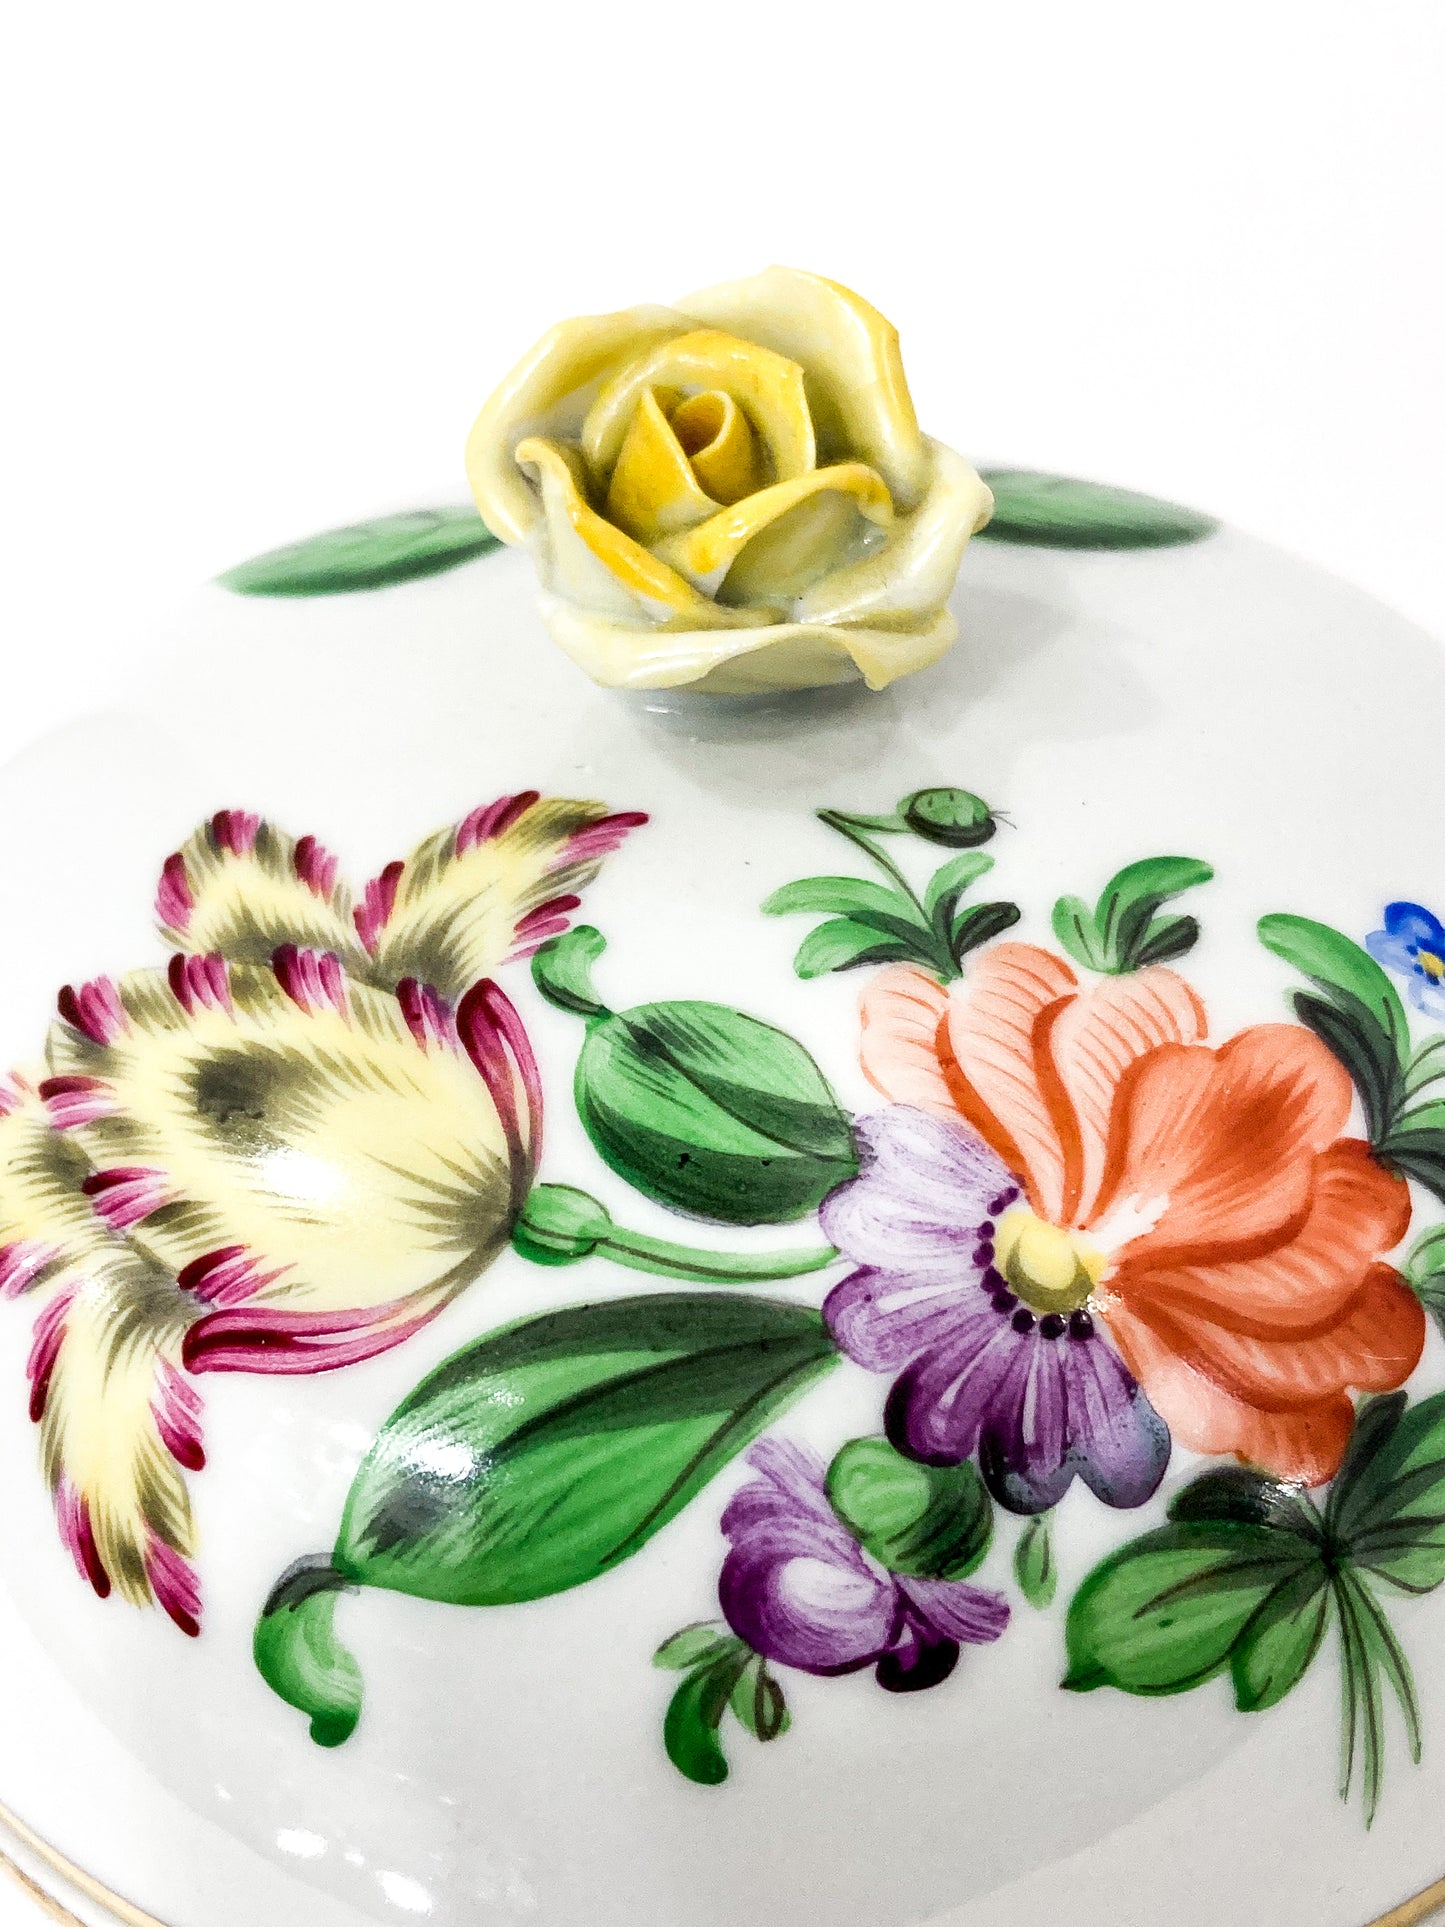 20th Century Herend Hand Painted Porcelain Yellow Rose Trinket Box Close Up Top and Floral Painting